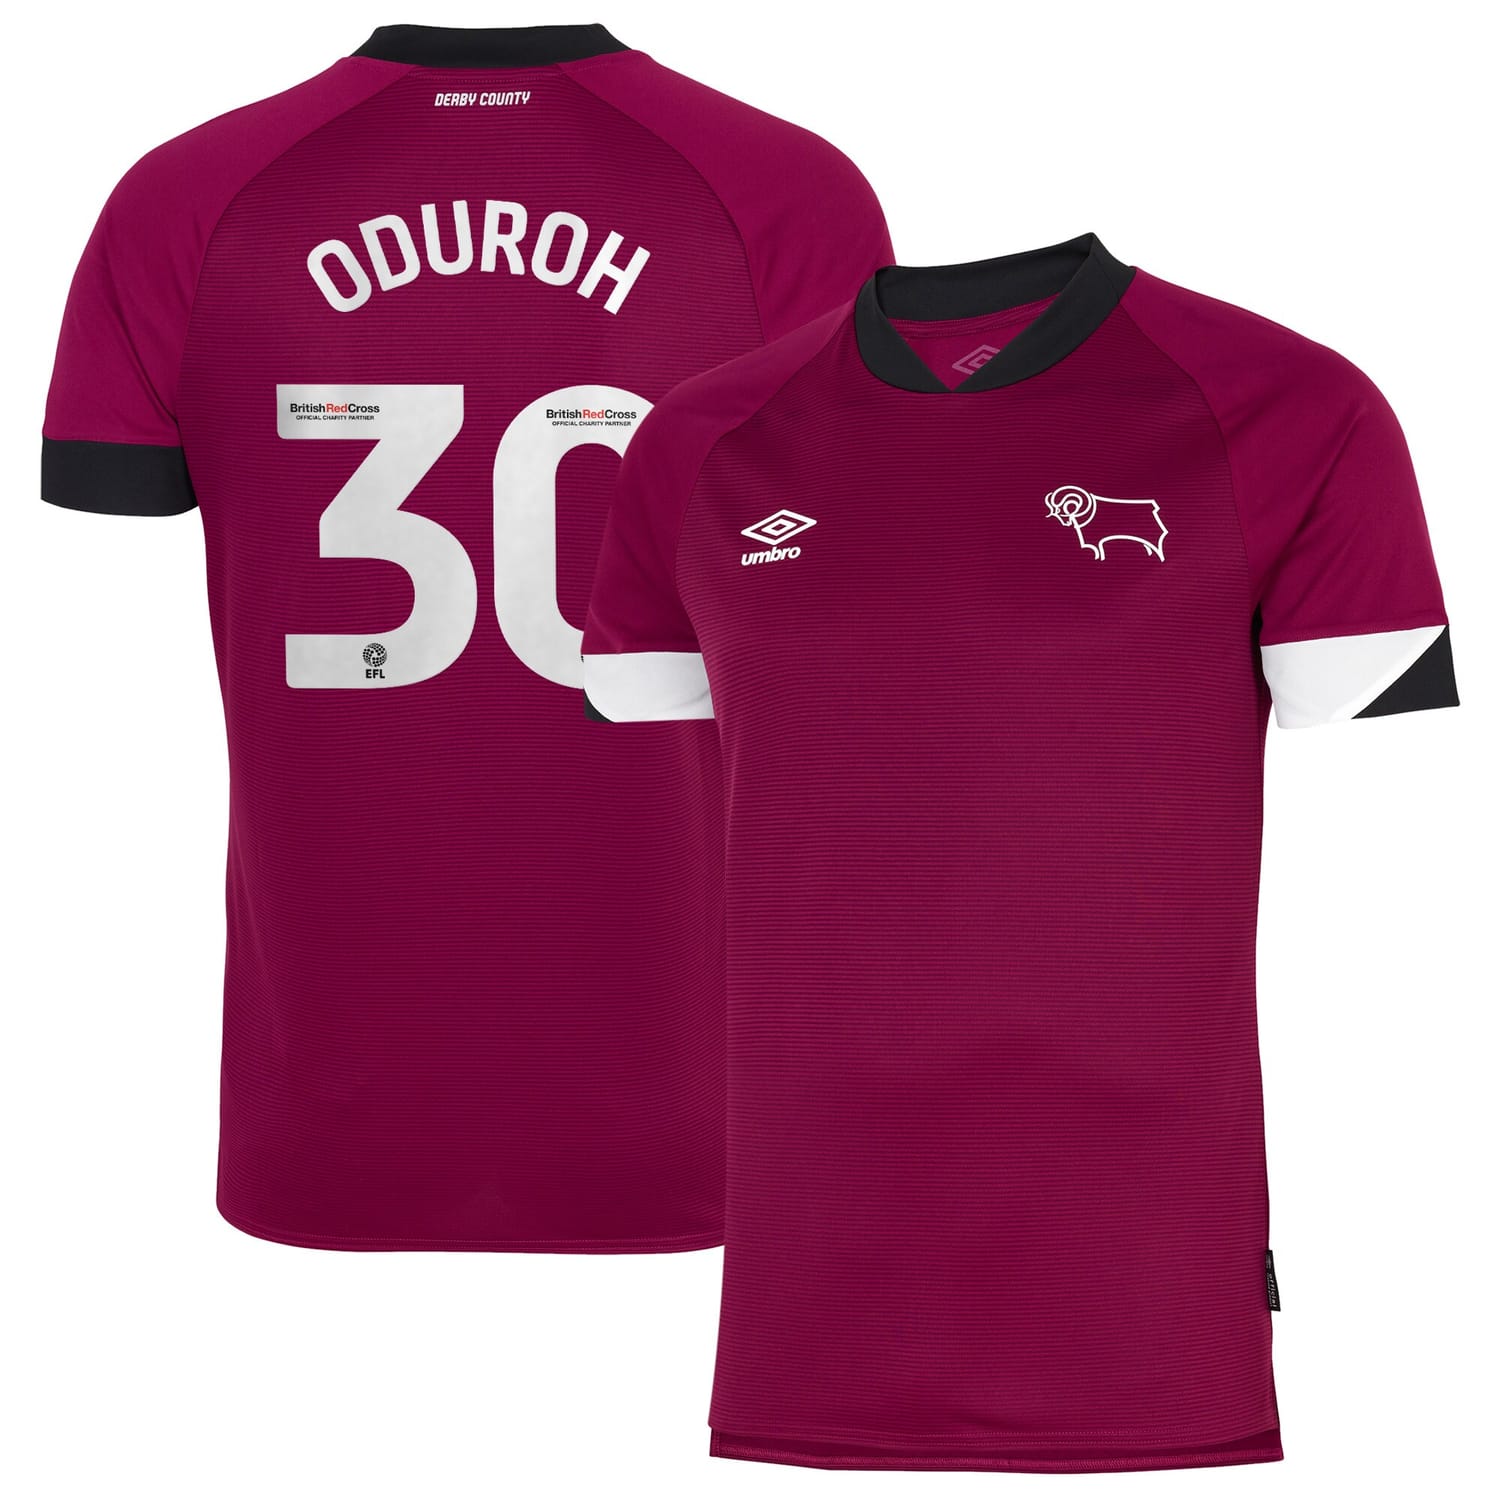 EFL League One Derby County Third Jersey Shirt 2022-23 player Oduroh 30 printing for Men